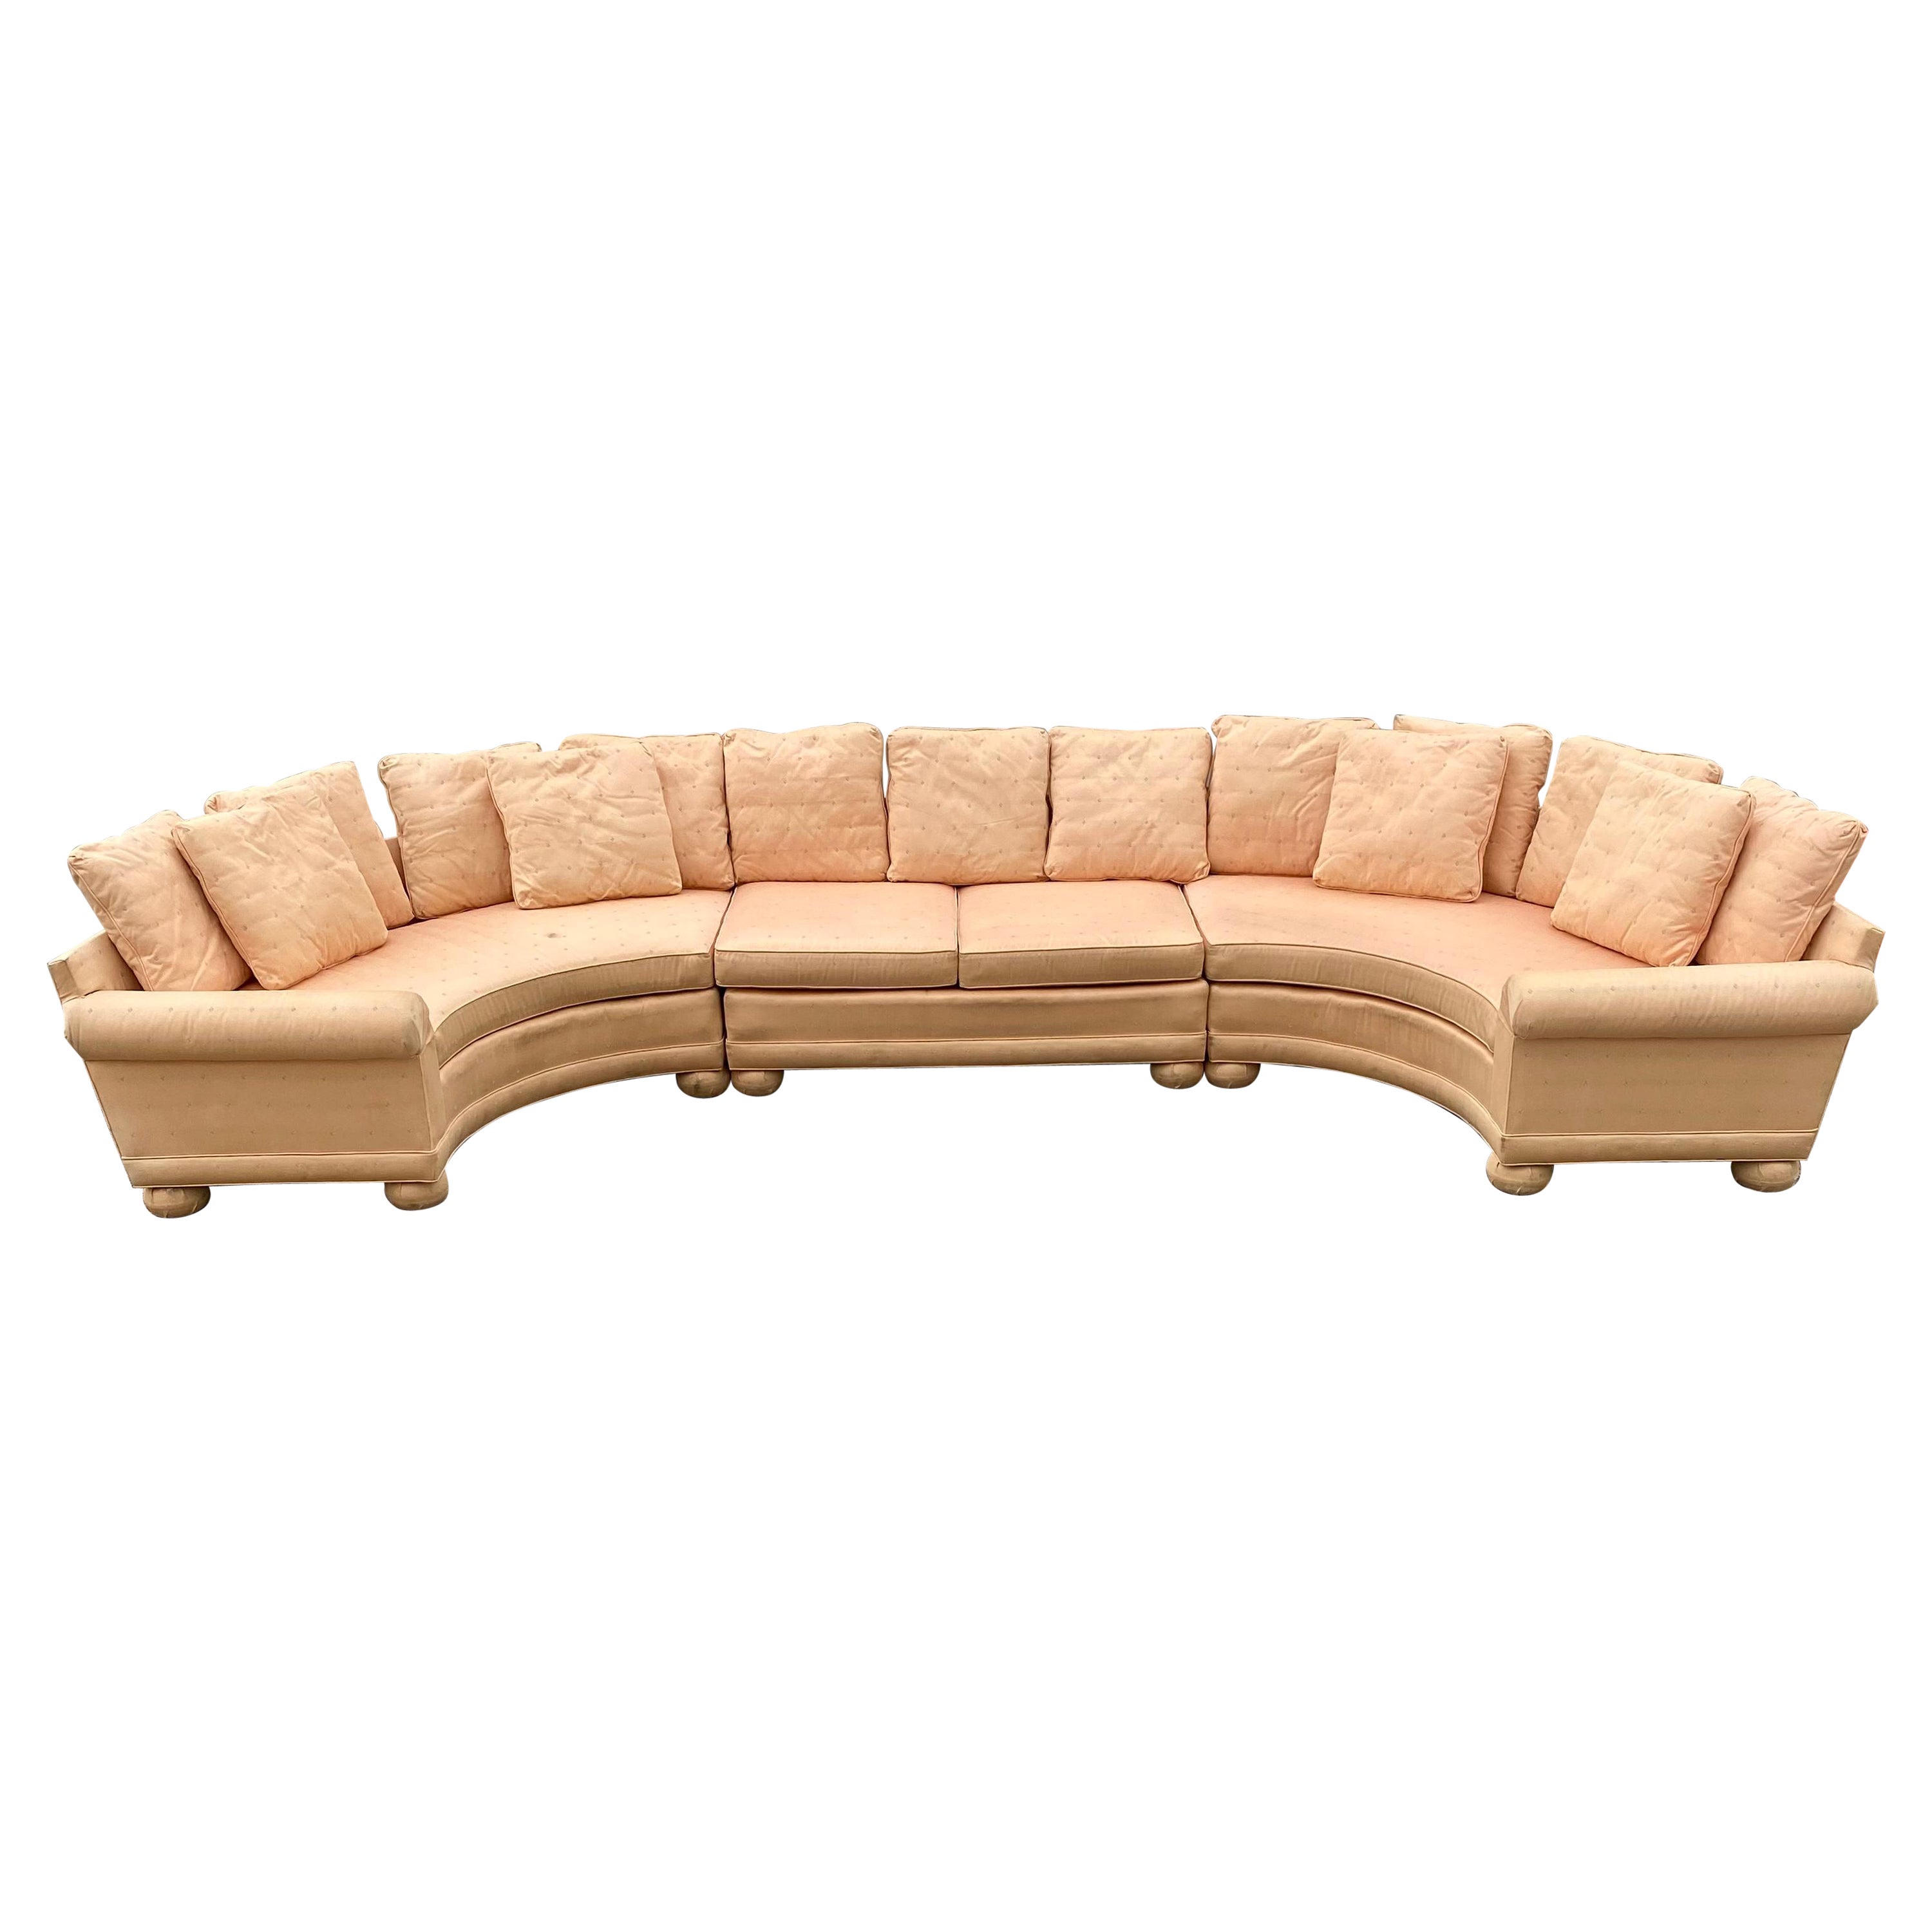 1970s Milo Baughman Salmon Satin Curved Sectional For Sale